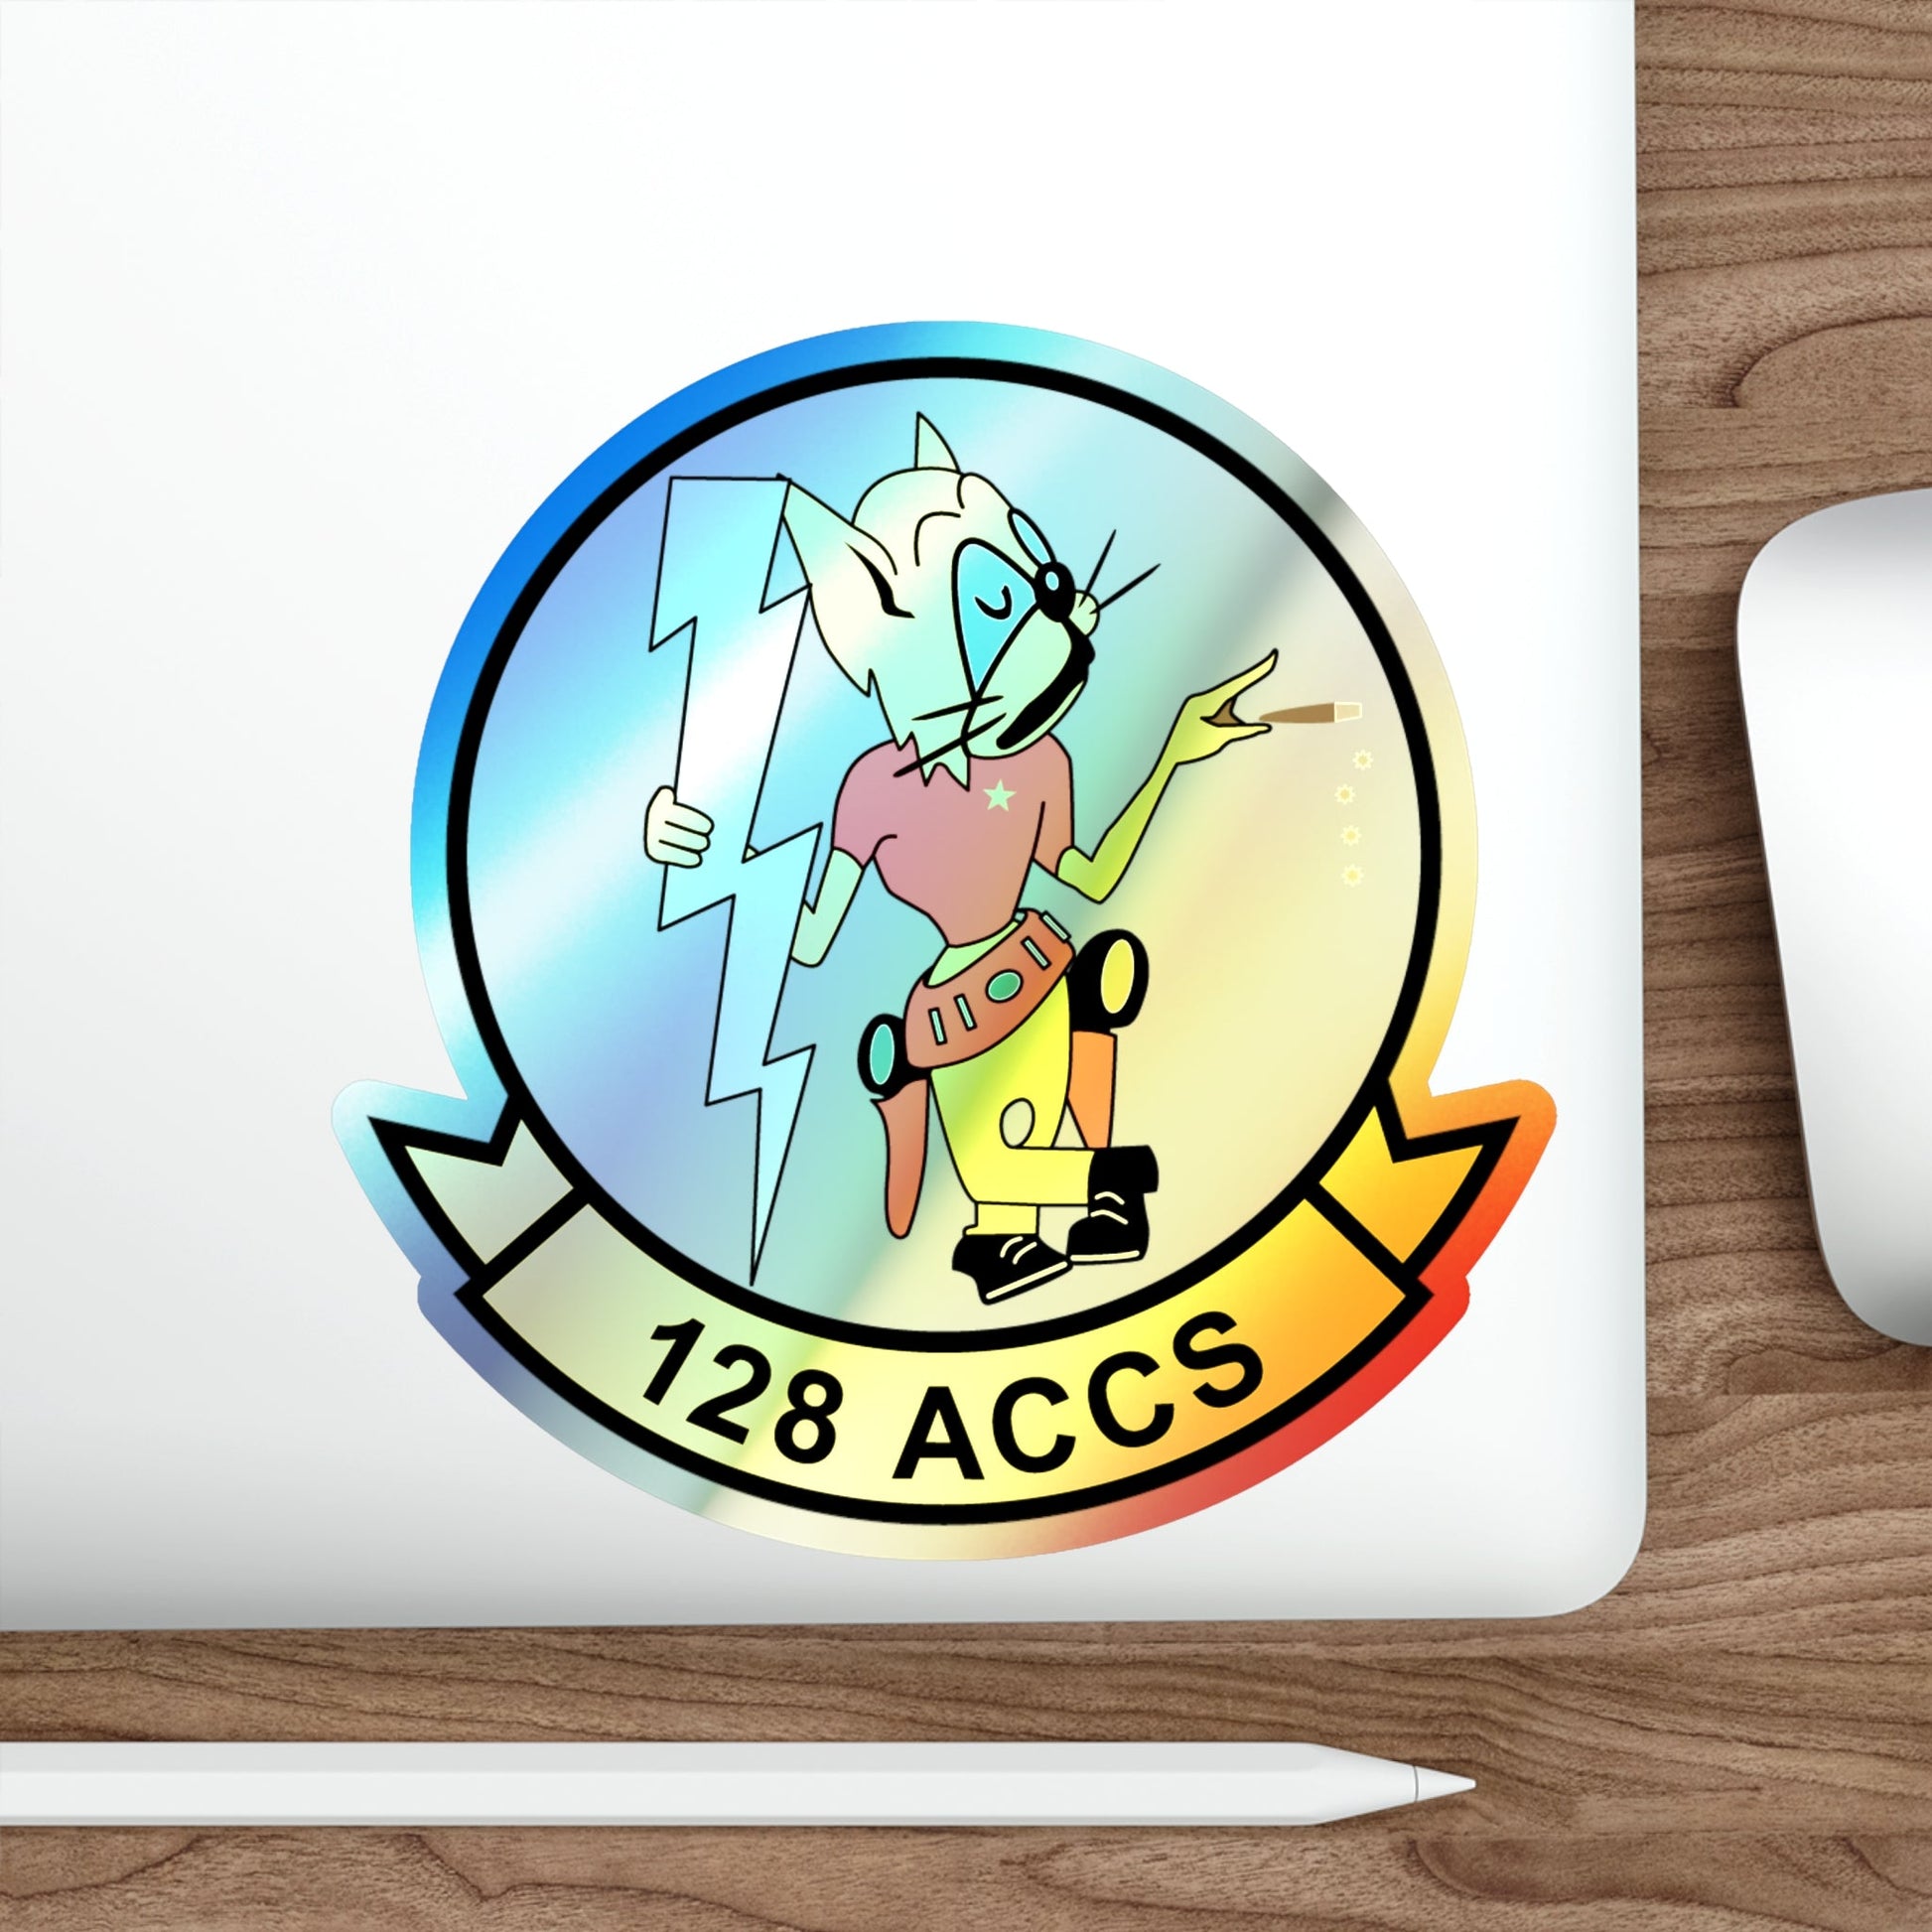 128 ACCS (U.S. Air Force) Holographic STICKER Die-Cut Vinyl Decal-The Sticker Space